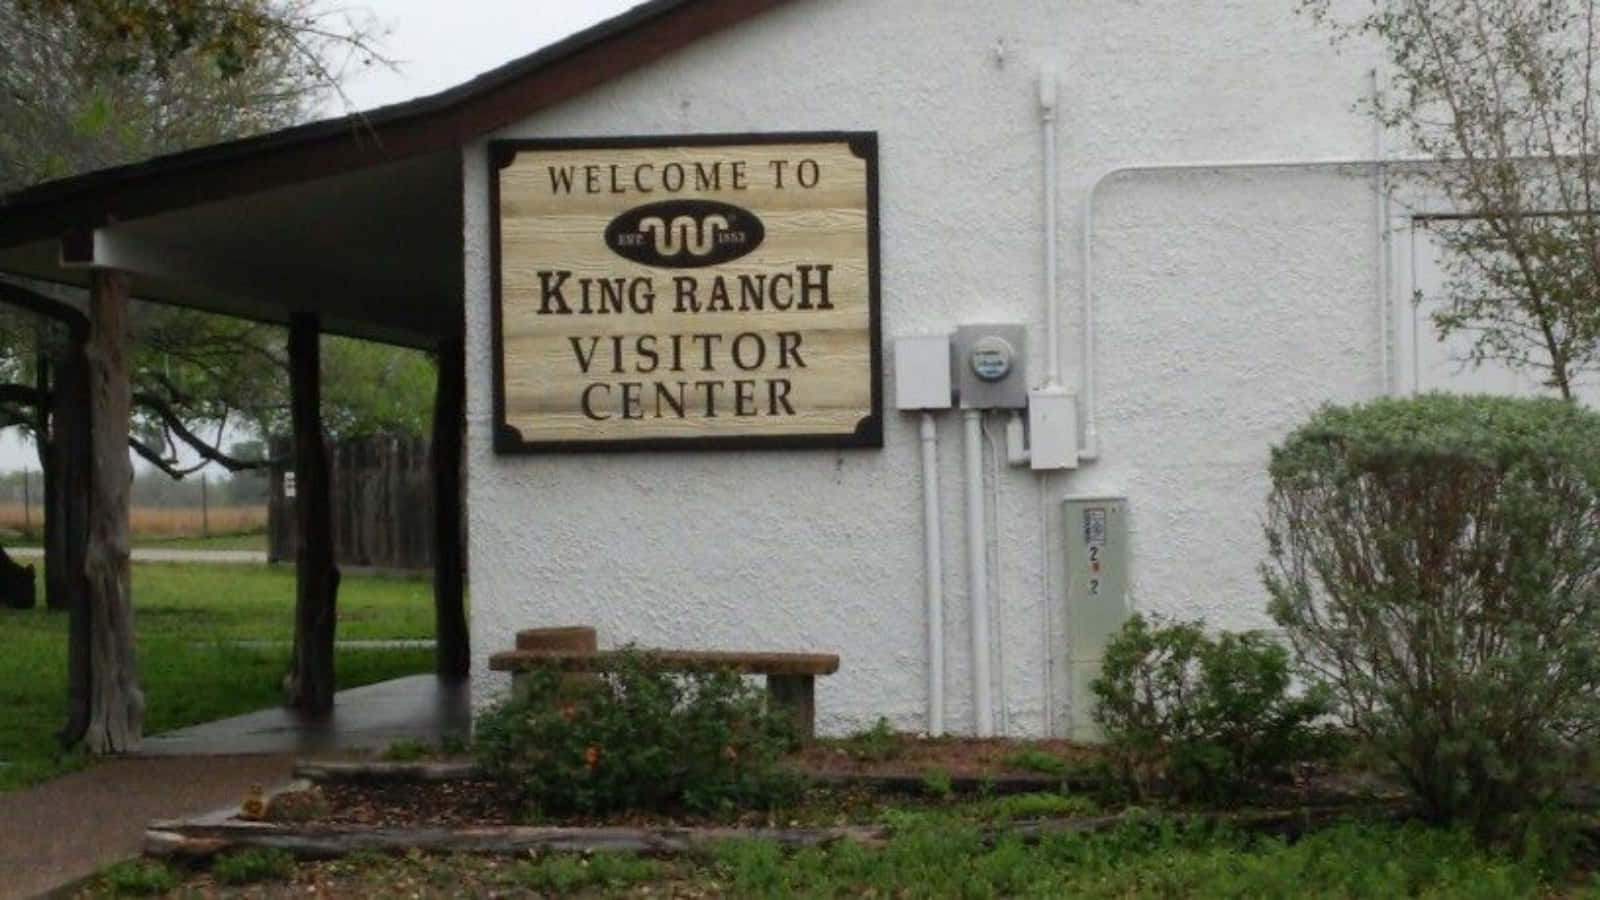 "Discover The Old Western Charms At The Historic King Ranch in Texas"